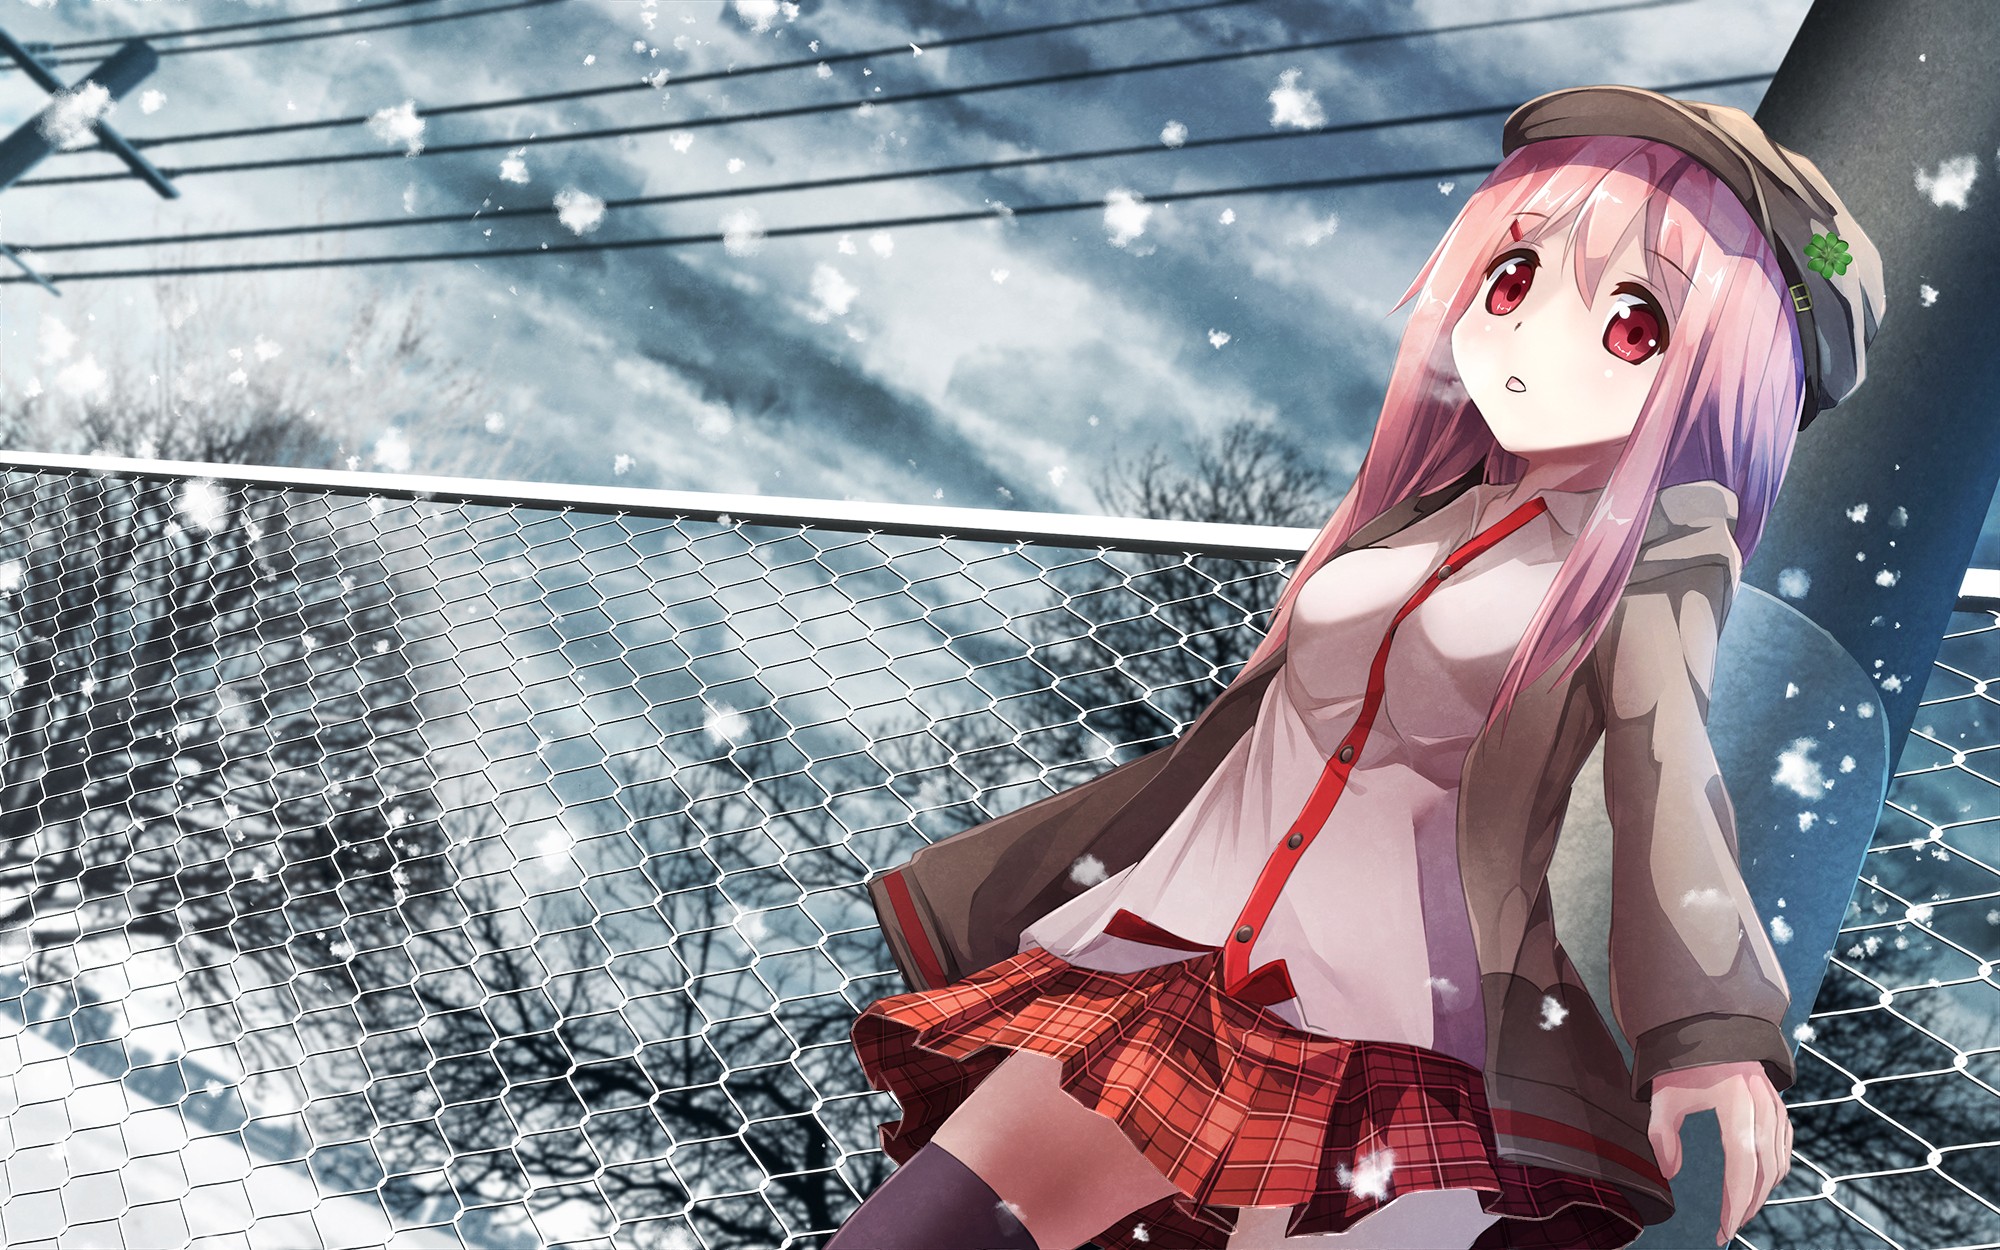 Anime 2000x1250 anime anime girls clouds hat red eyes skirt original characters snow zettai ryouiki Pixiv cold outdoors winter fence power lines miniskirt tie pink hair women with hats